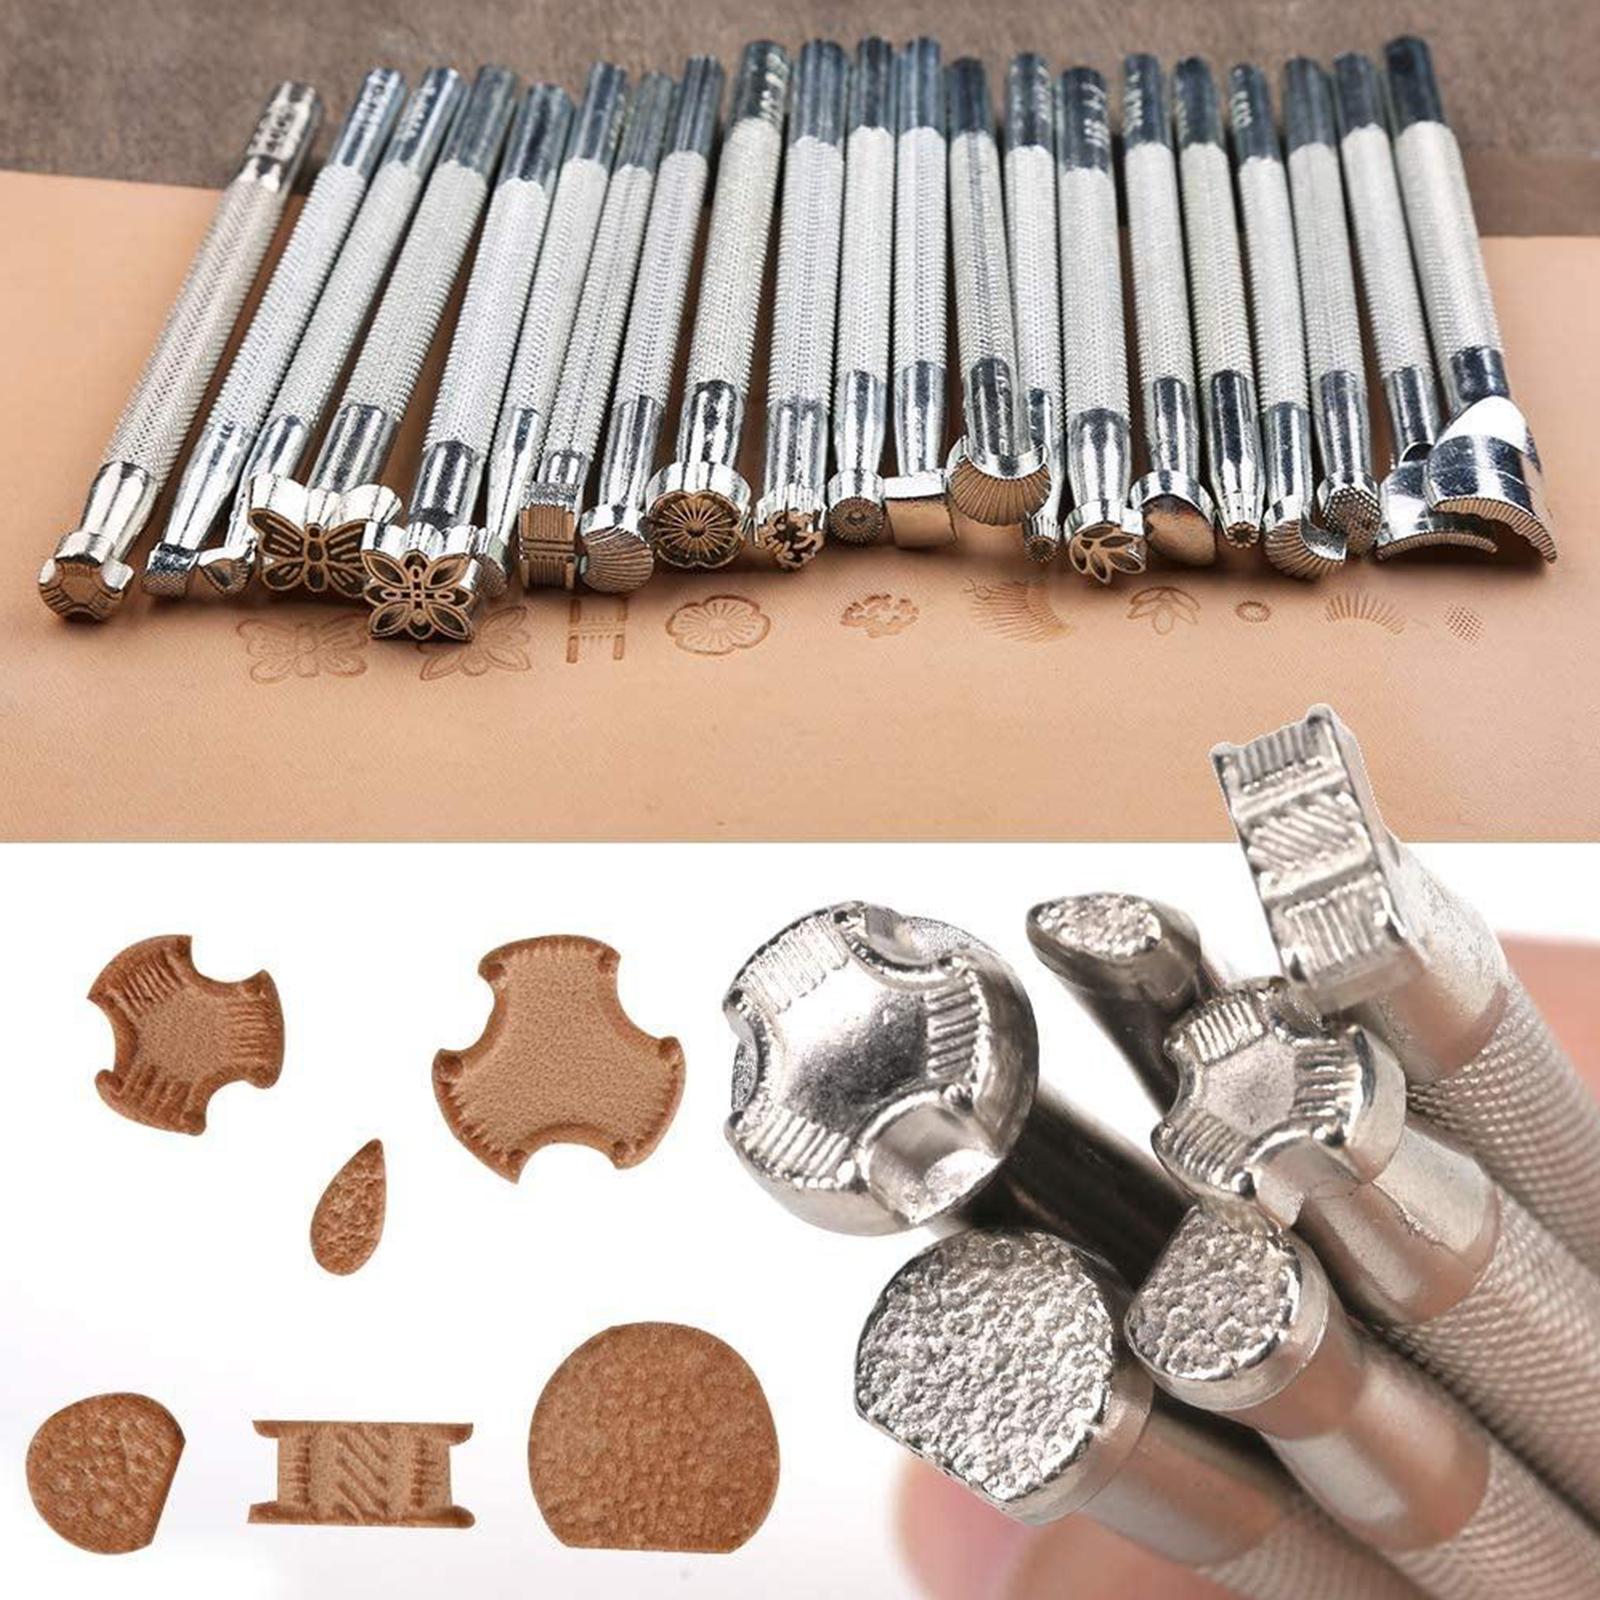 20pcs Leather Stamping Tools Sets Leather Carving Tool Kit Leather Stamps  Patterns Leather Working Carving Punches Tools Carving Leather Craft Tools  for DIY Beginners and Professionals N8P8 